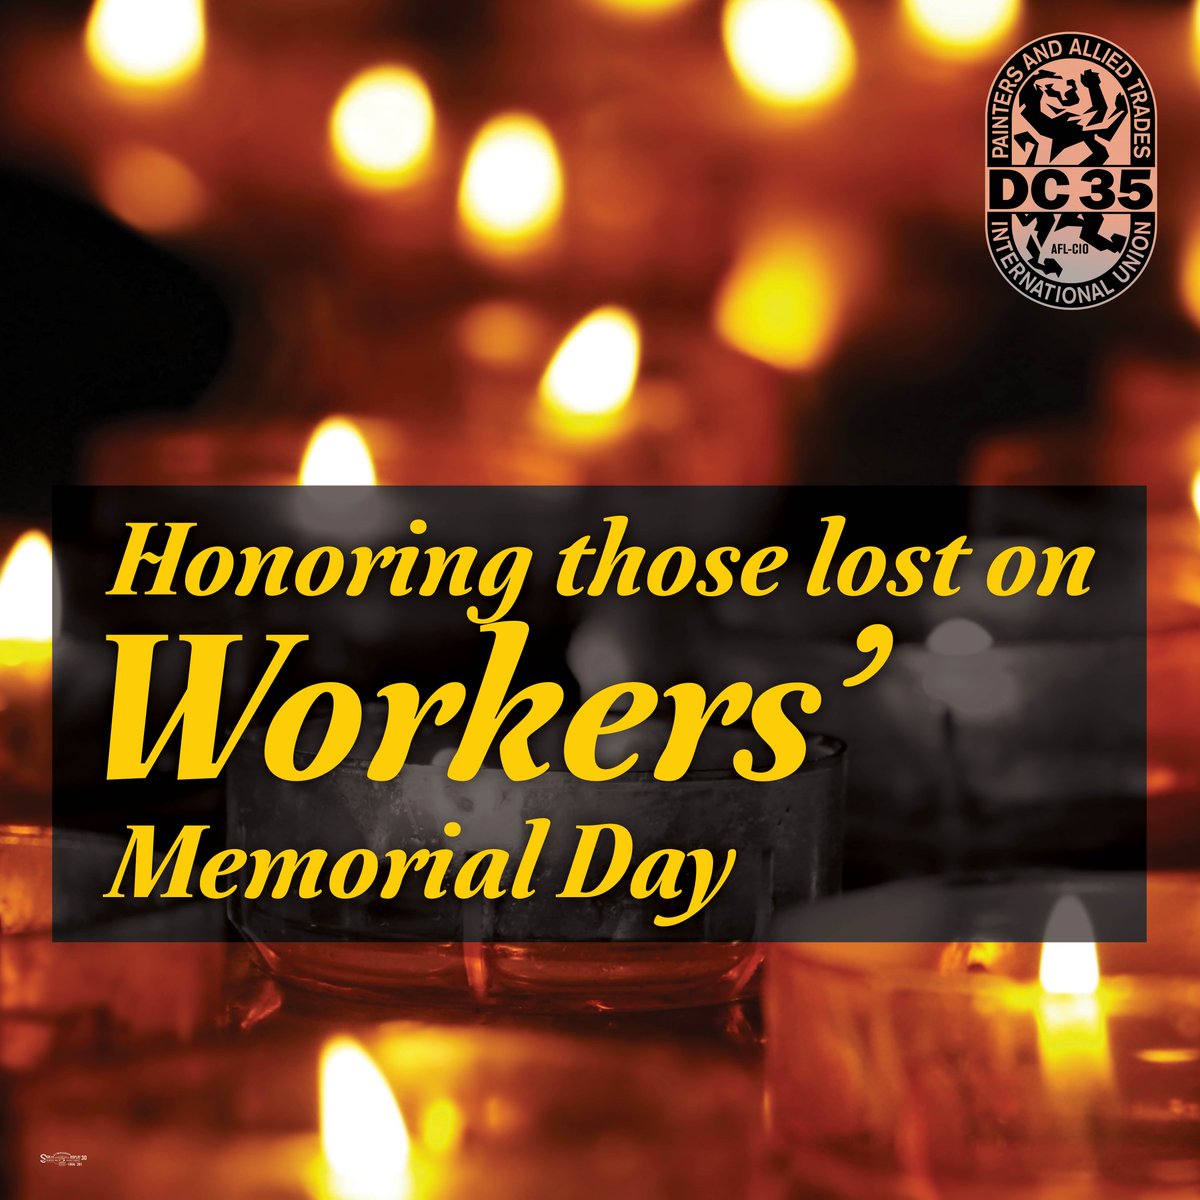 Today we honor the workers we've lost. DC 35 continues to carry the torch and strive for safe working conditions to ensure all workers get home to their families in one piece.